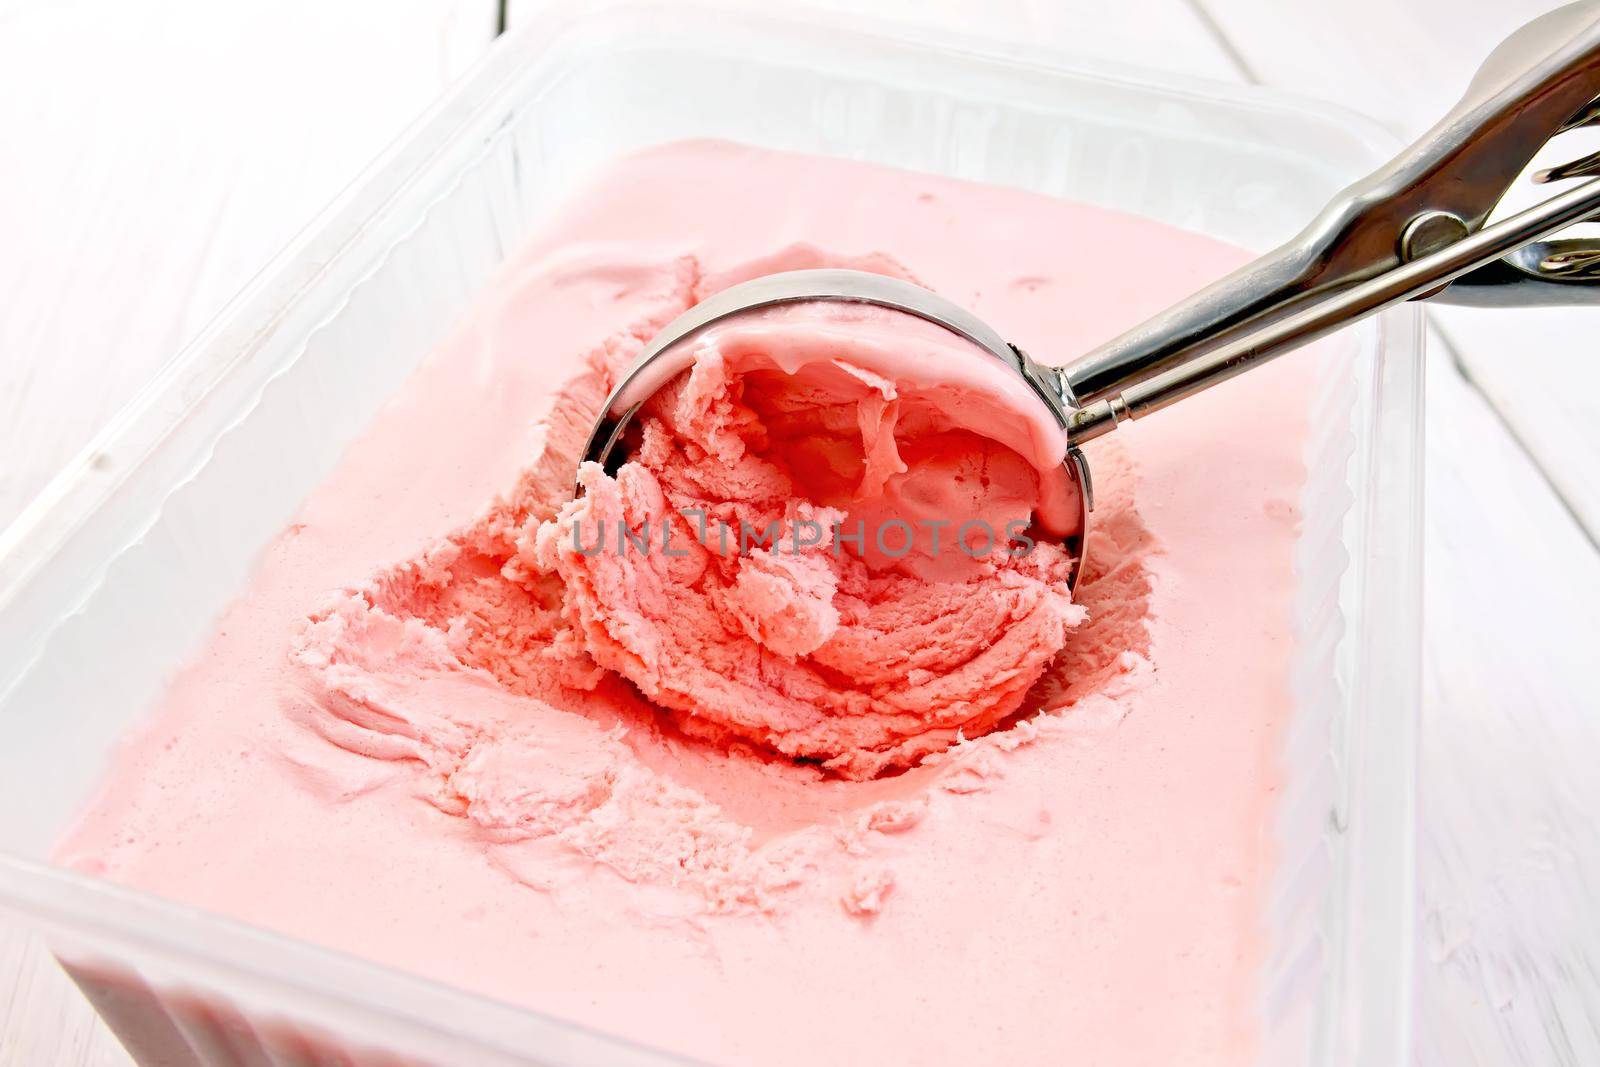 Strawberry ice cream in a plastic tray and a metal scoop on background light wooden boards